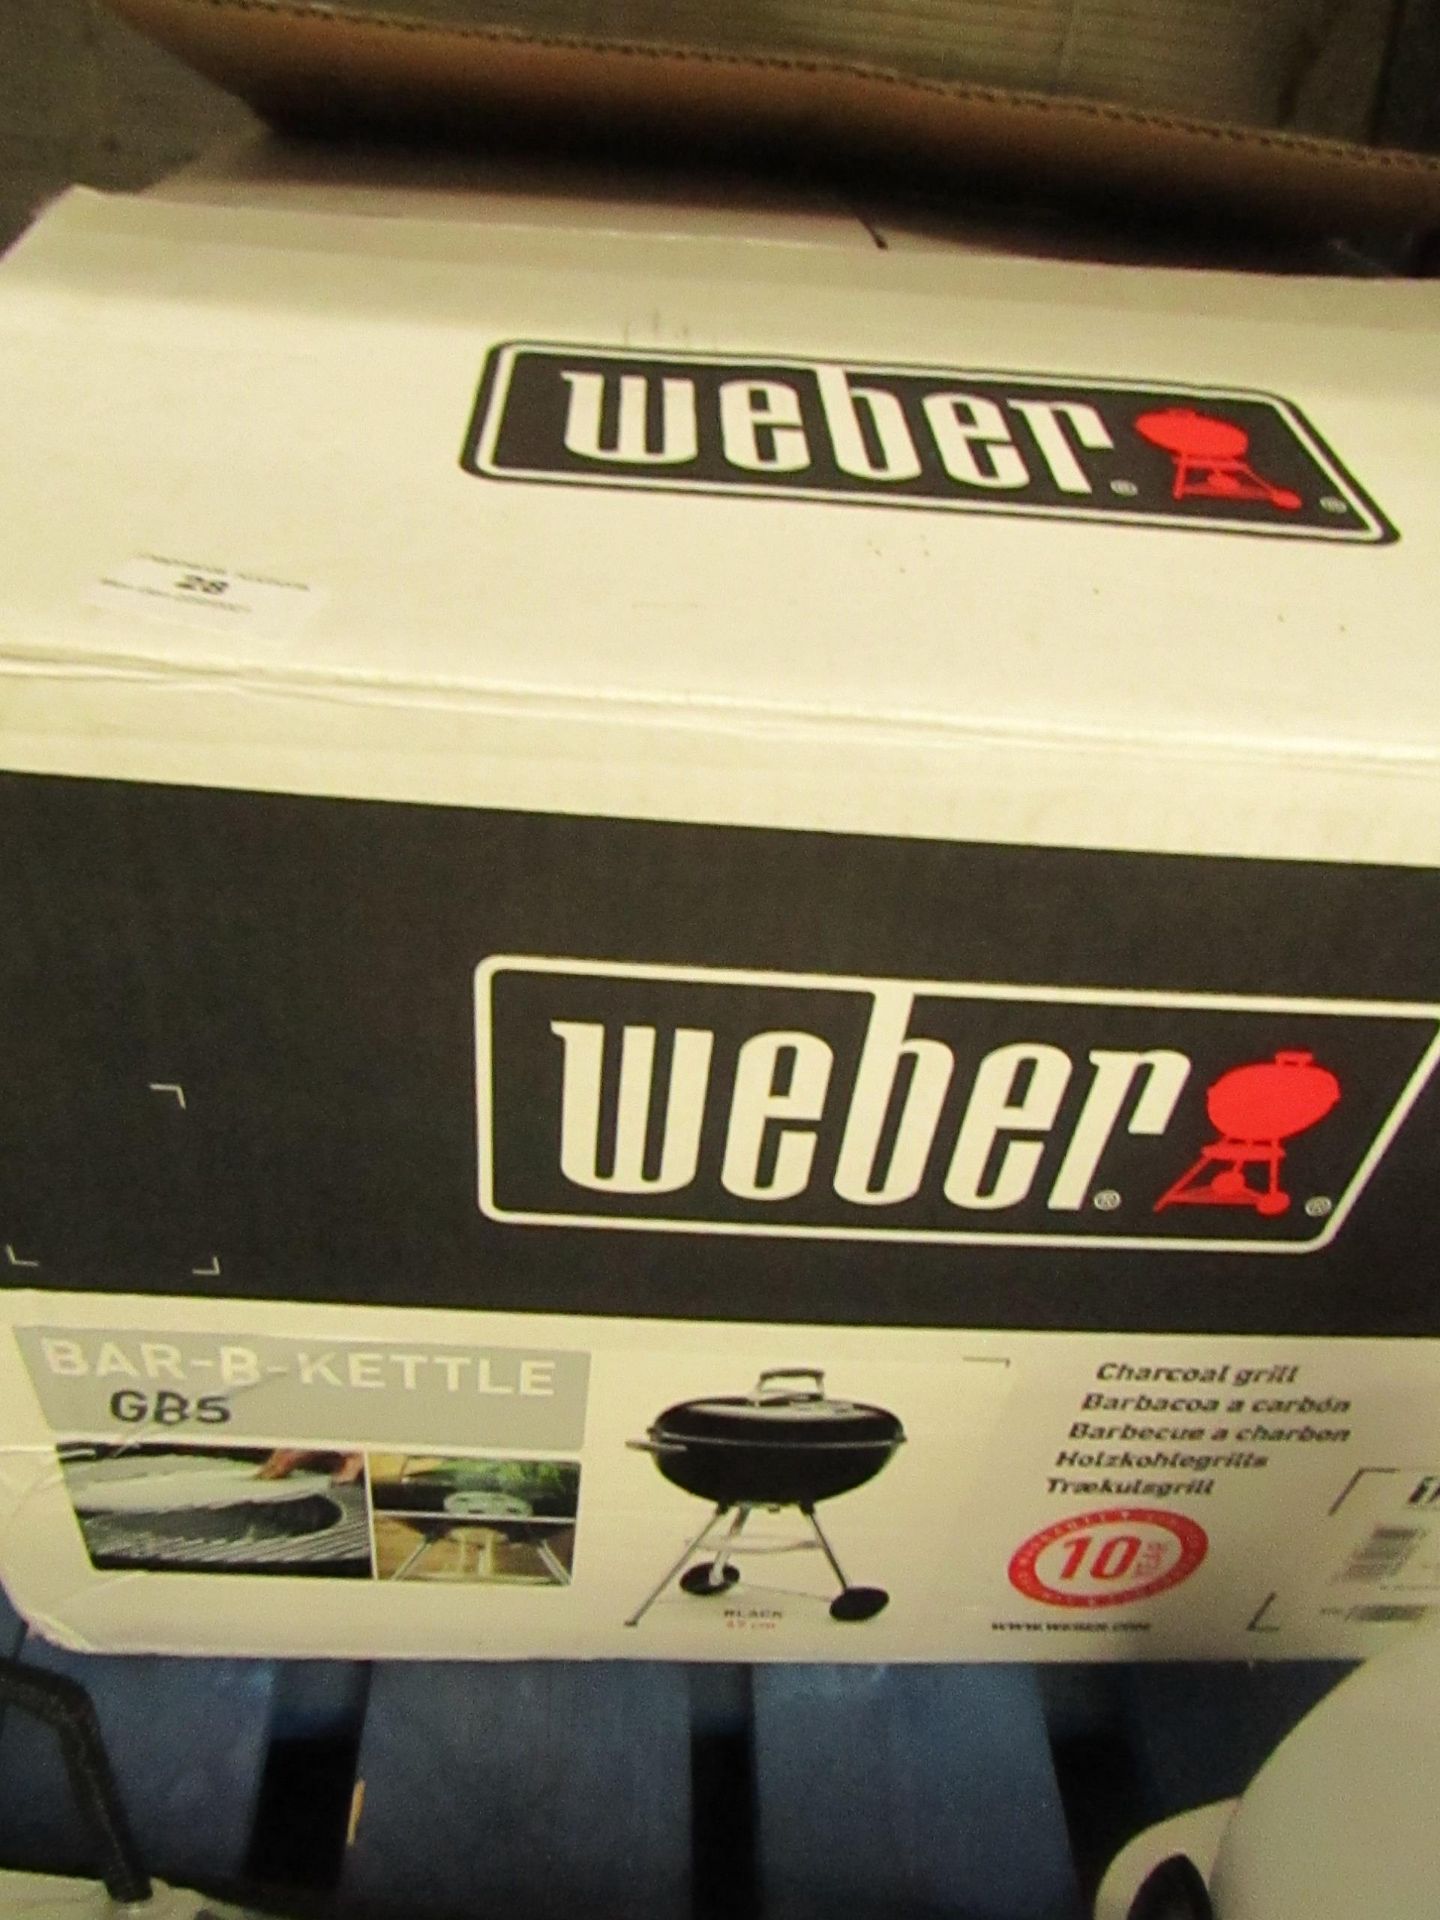 Weber - Bar-B-Kettle GBS - Charcoal Grill - Unchecked & Boxed.